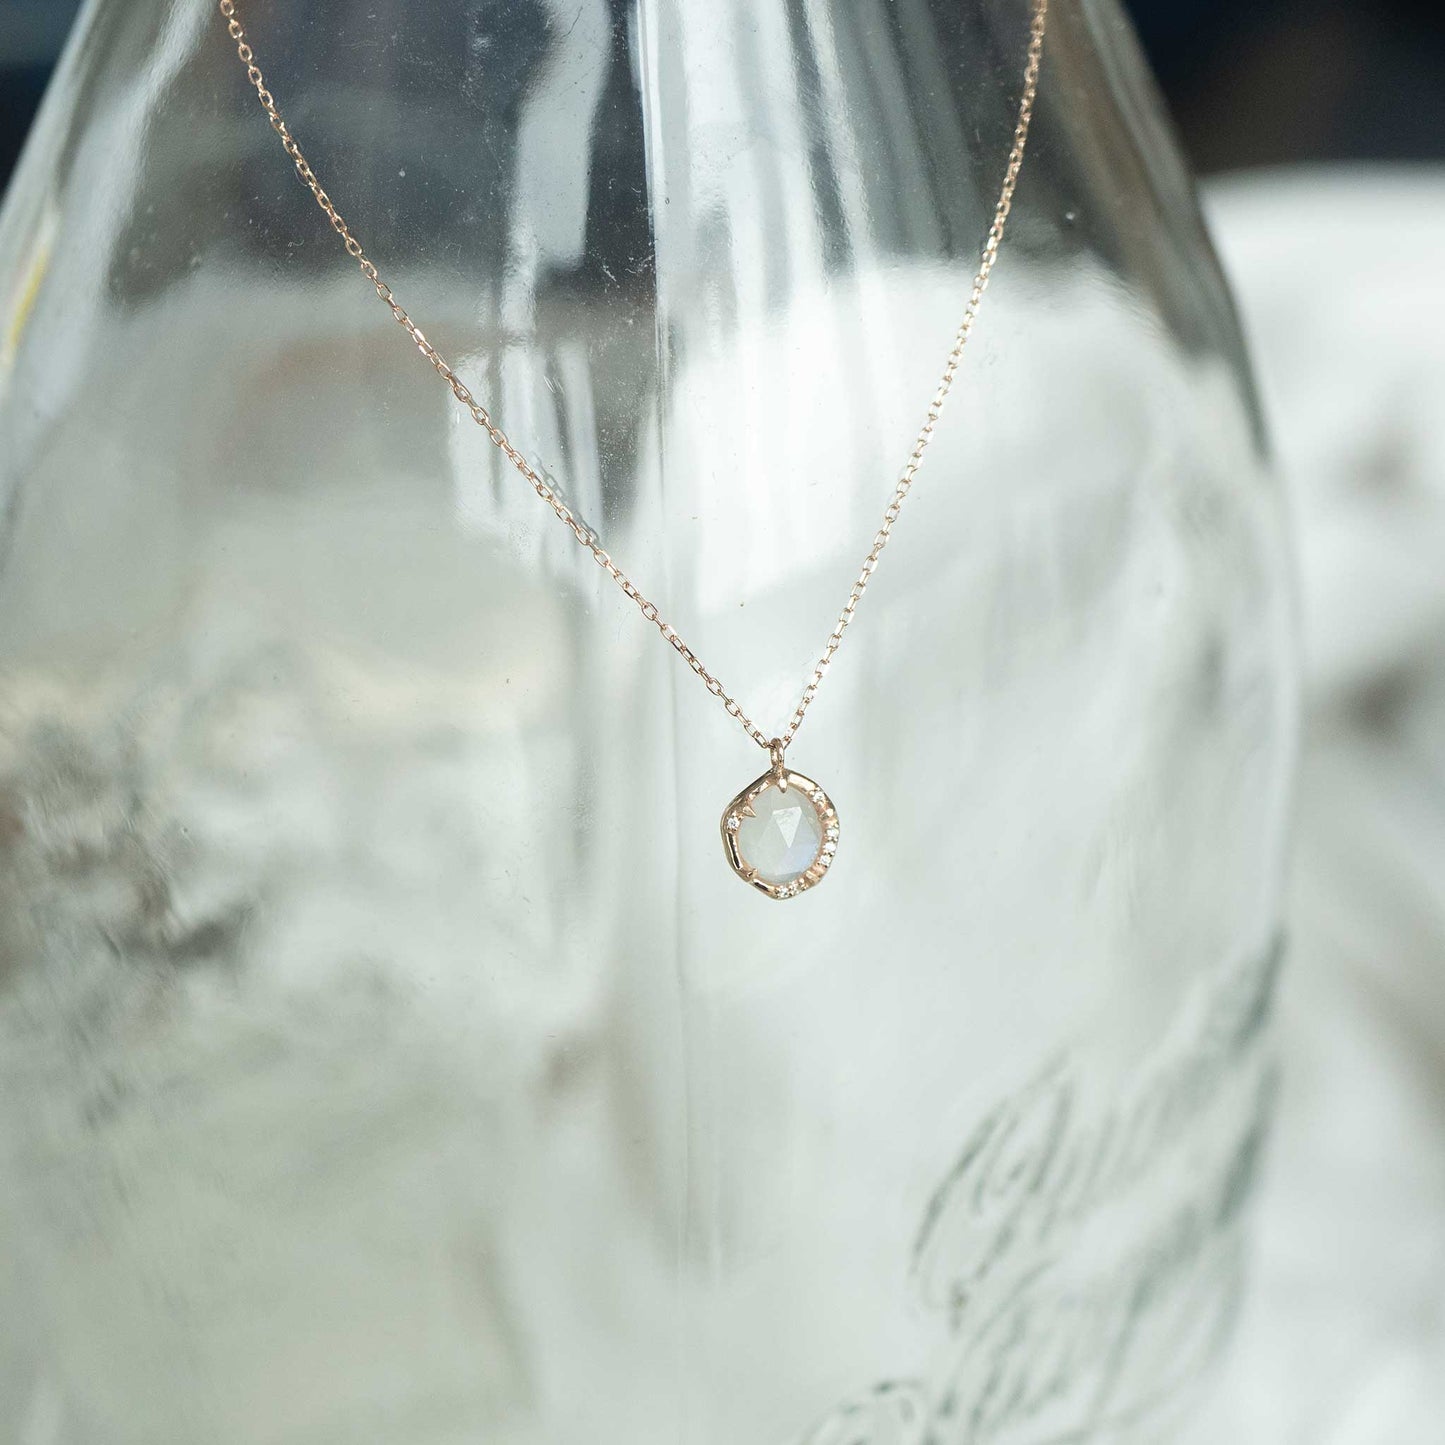 Solid Rose Gold Moonstone Diamond Necklace